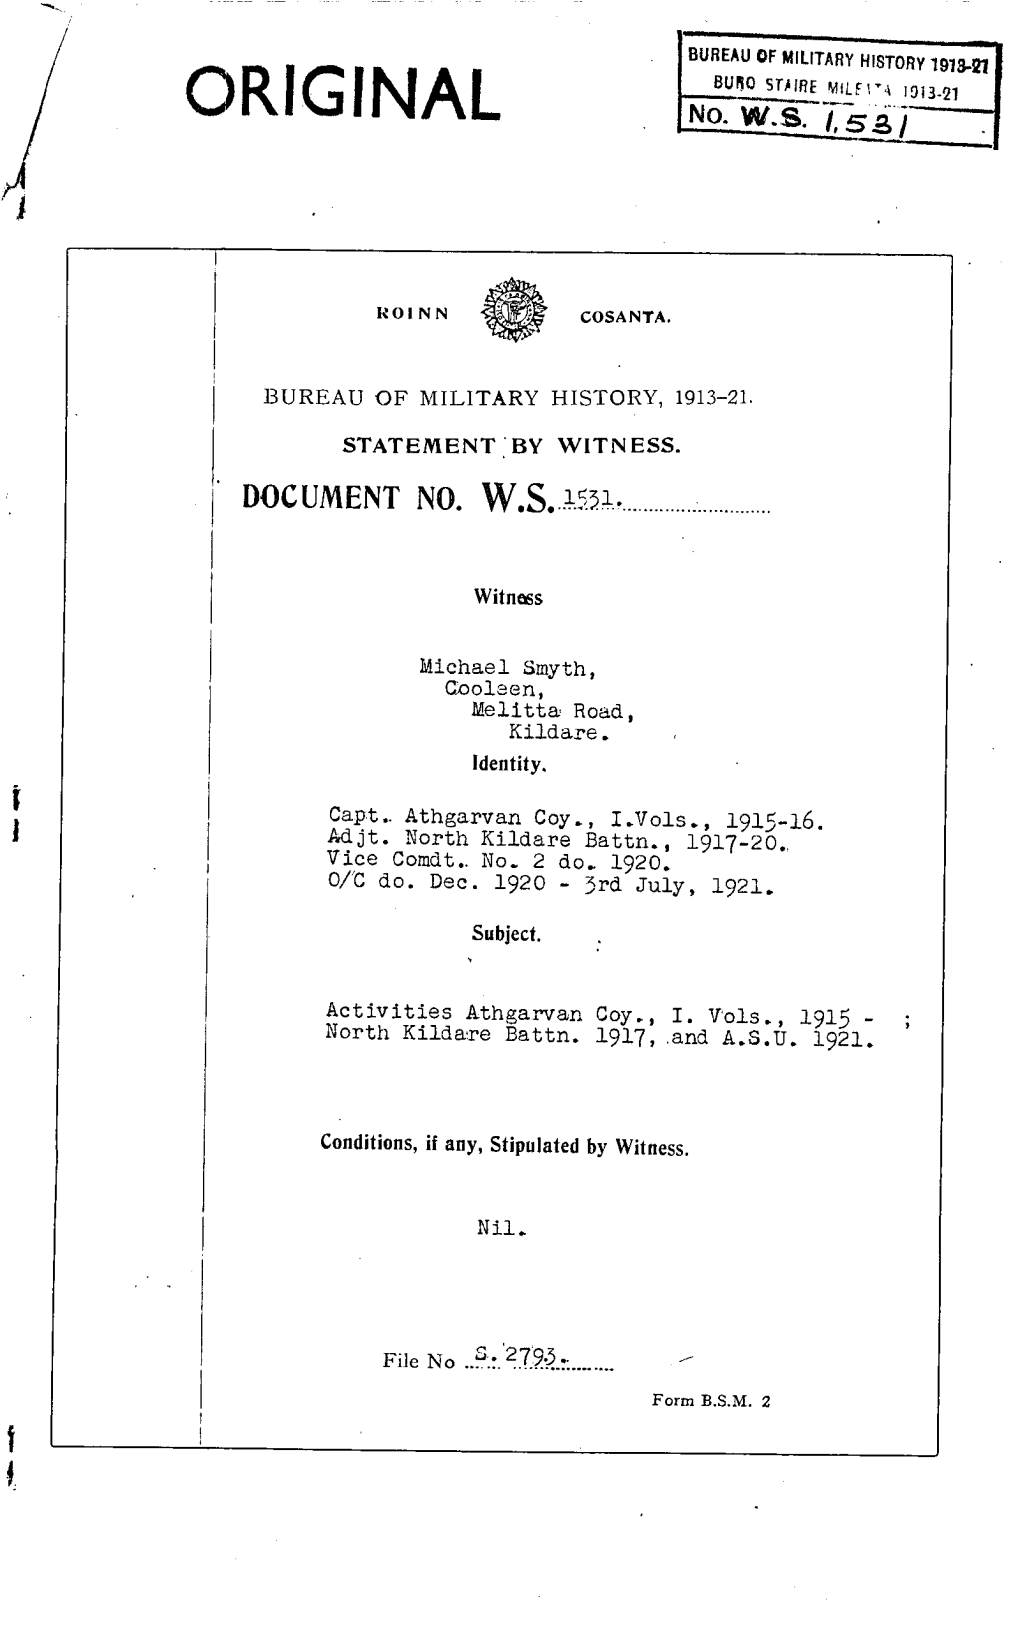 ROINN COSANTA. BUREAU of MILITARY HISTORY, 1913-21. STATEMENT by WITNESS. DOCUMENT NO. W.S. 1531. Witness Michael Smyth, Cooleen